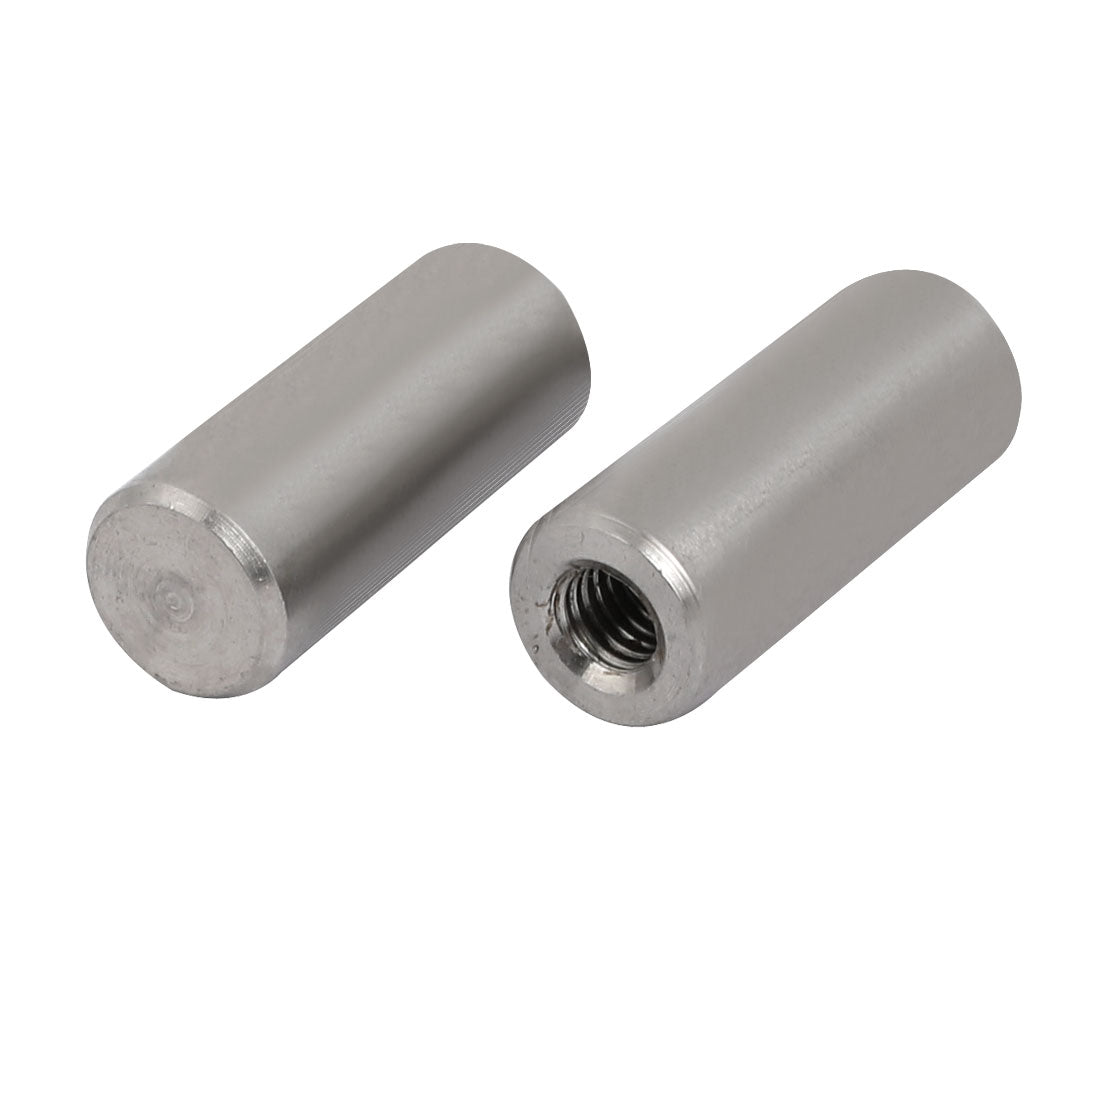 uxcell Uxcell 304 Stainless Steel M6 Female Thread 12mm x 30mm Cylindrical Dowel Pin 2pcs